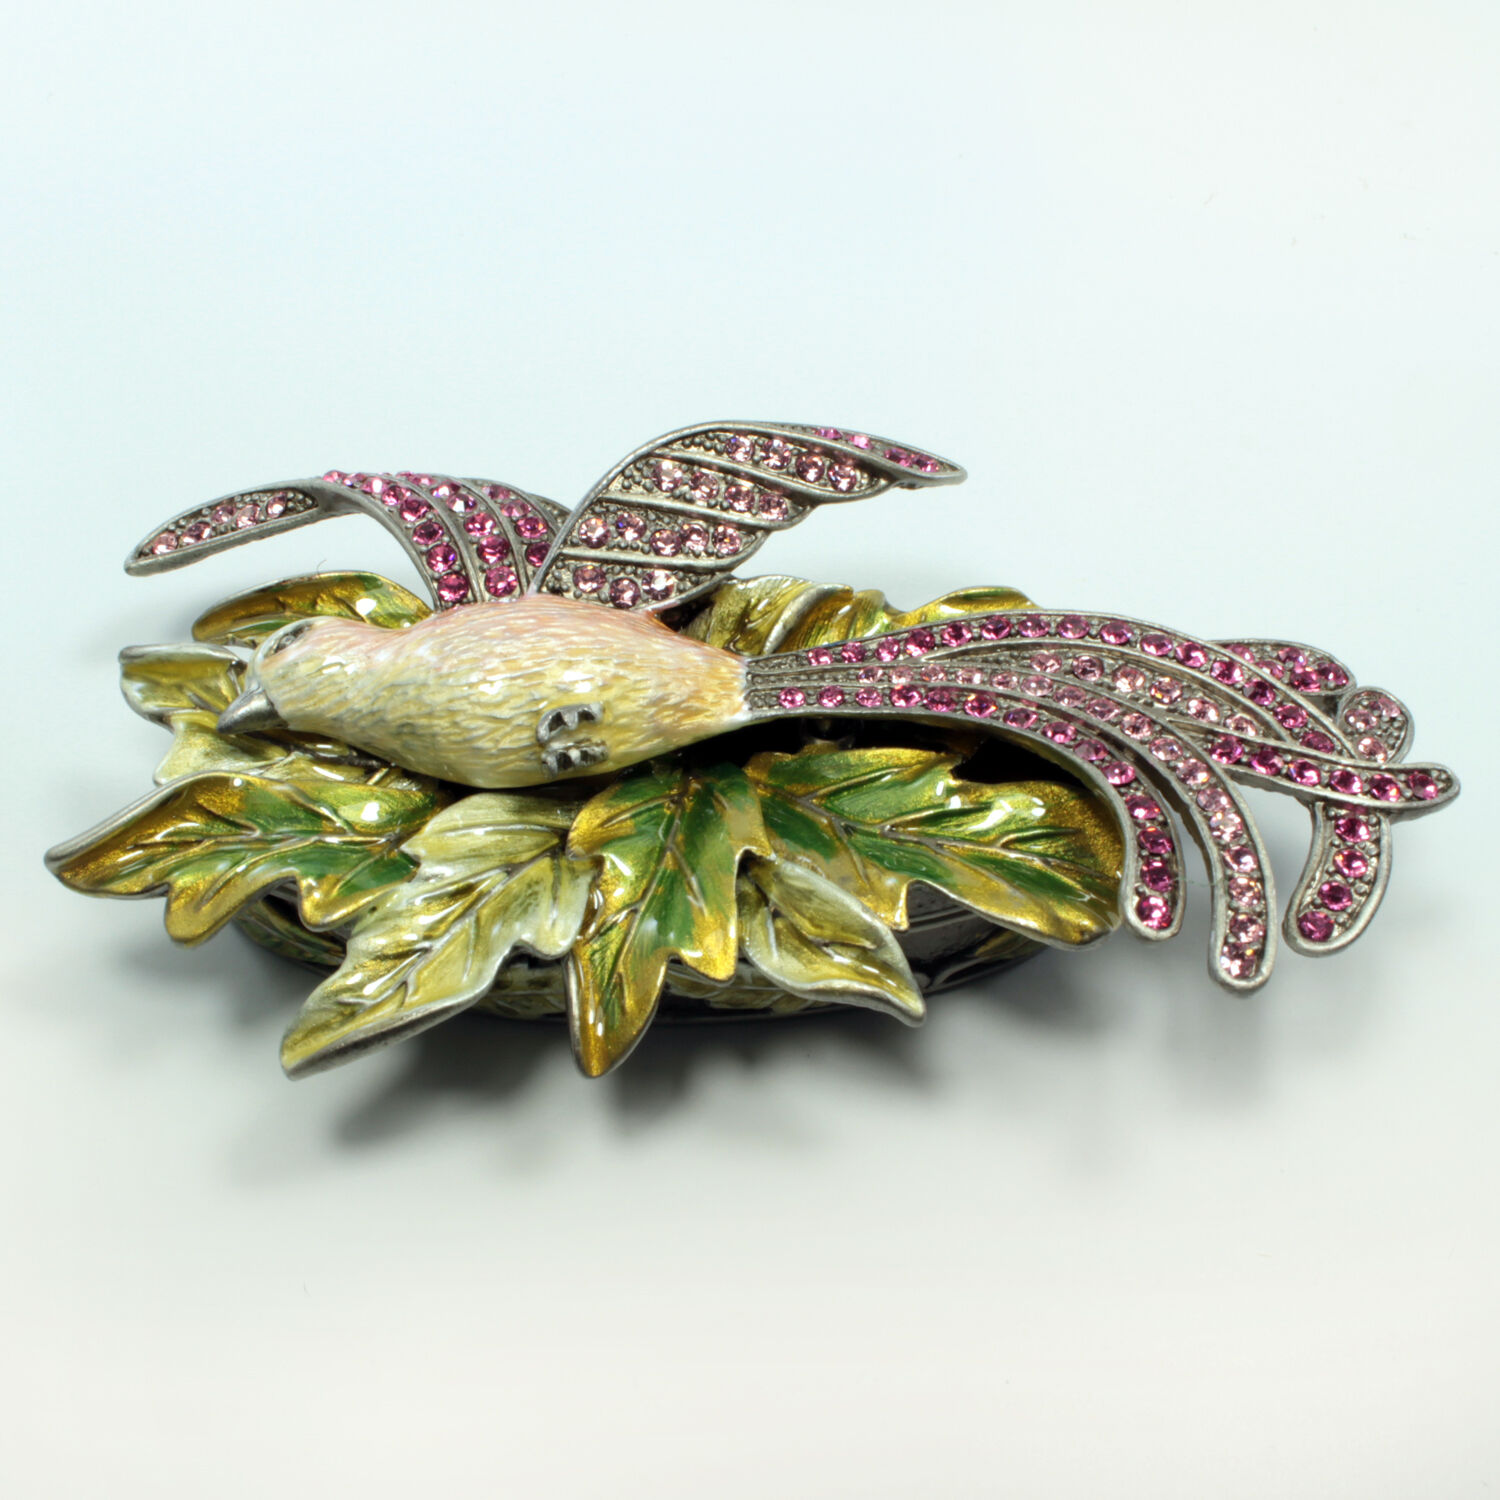 Jeweled bird of paradise trinket box, Faberge  figurine, with crystals in rose